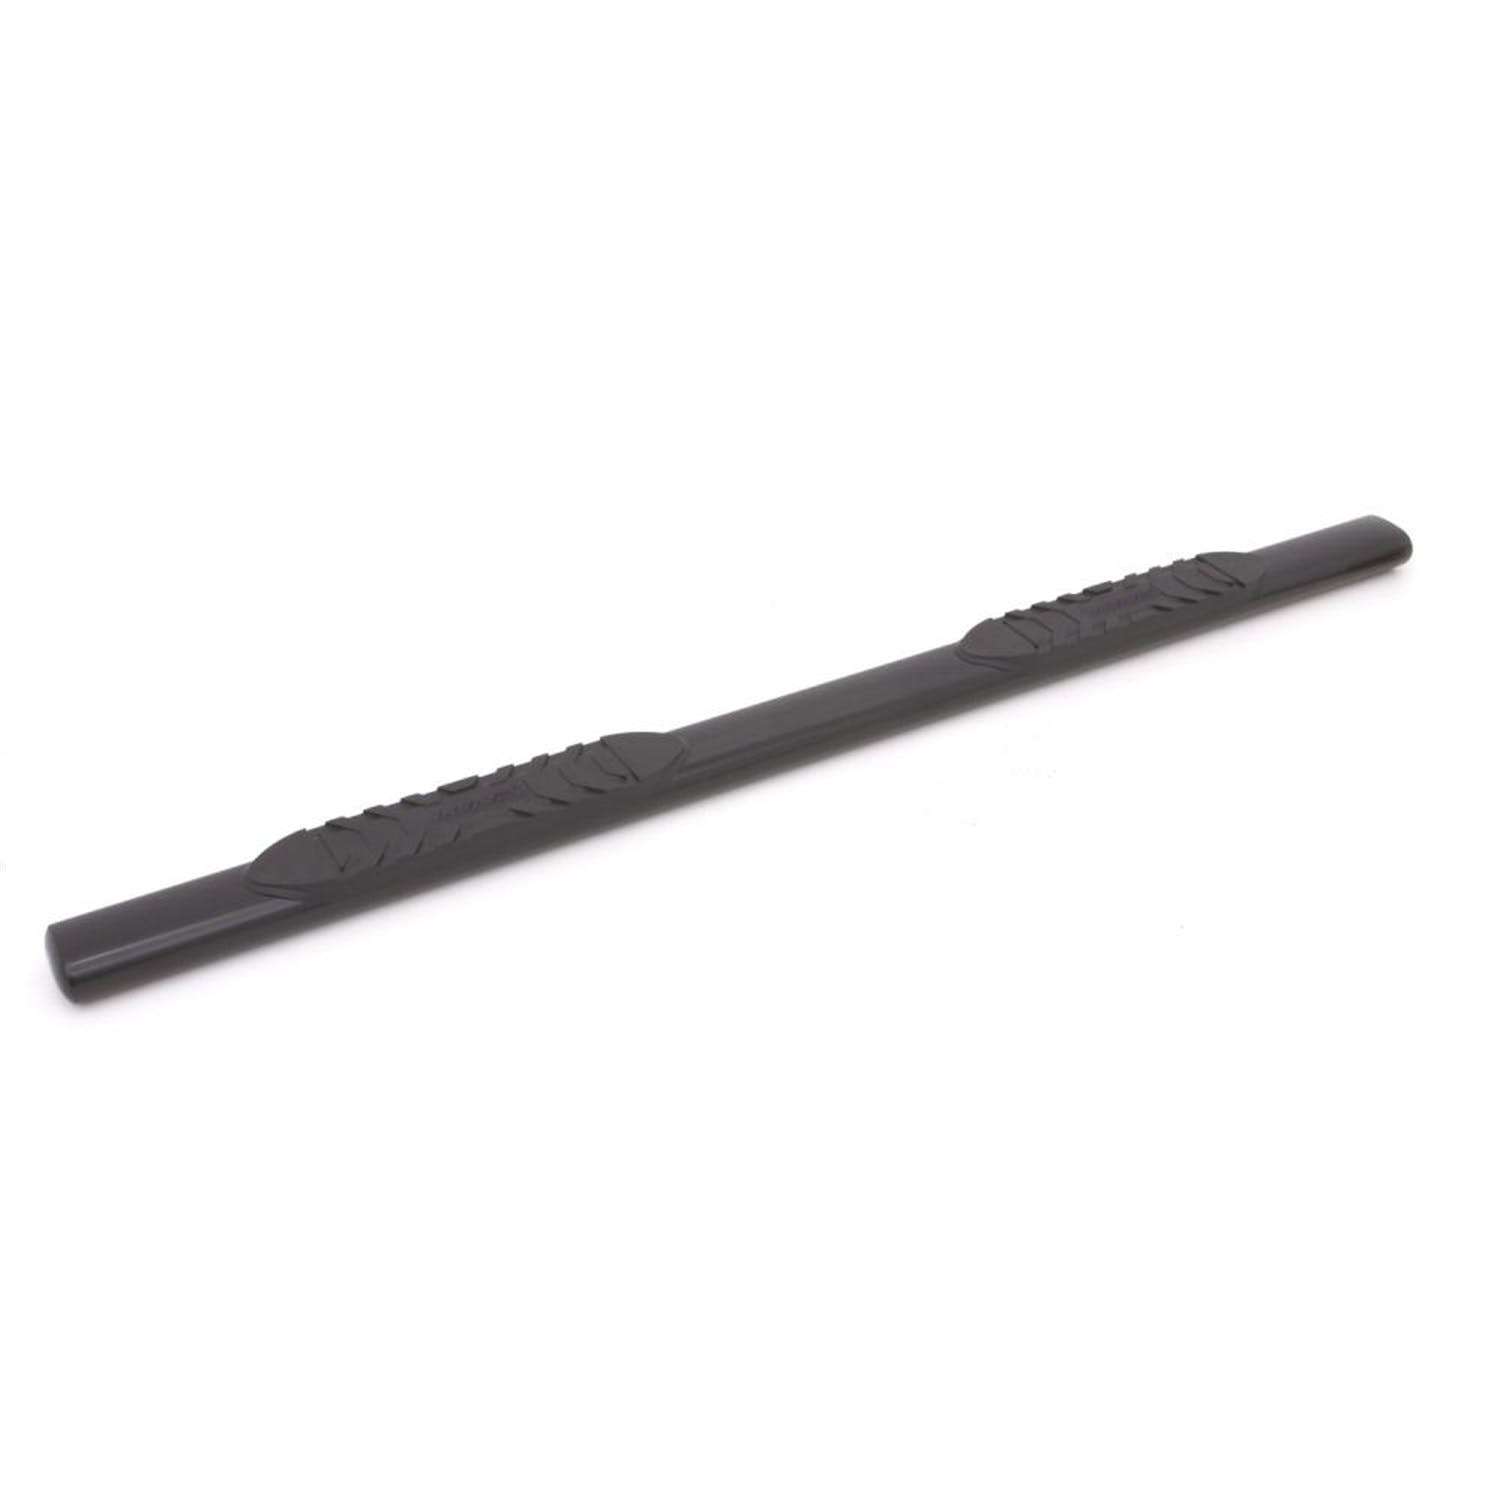 LUND 26610566 6 Inch Oval Straight Nerf Bar - Black 6 In OVAL STRAIGHT BLACK